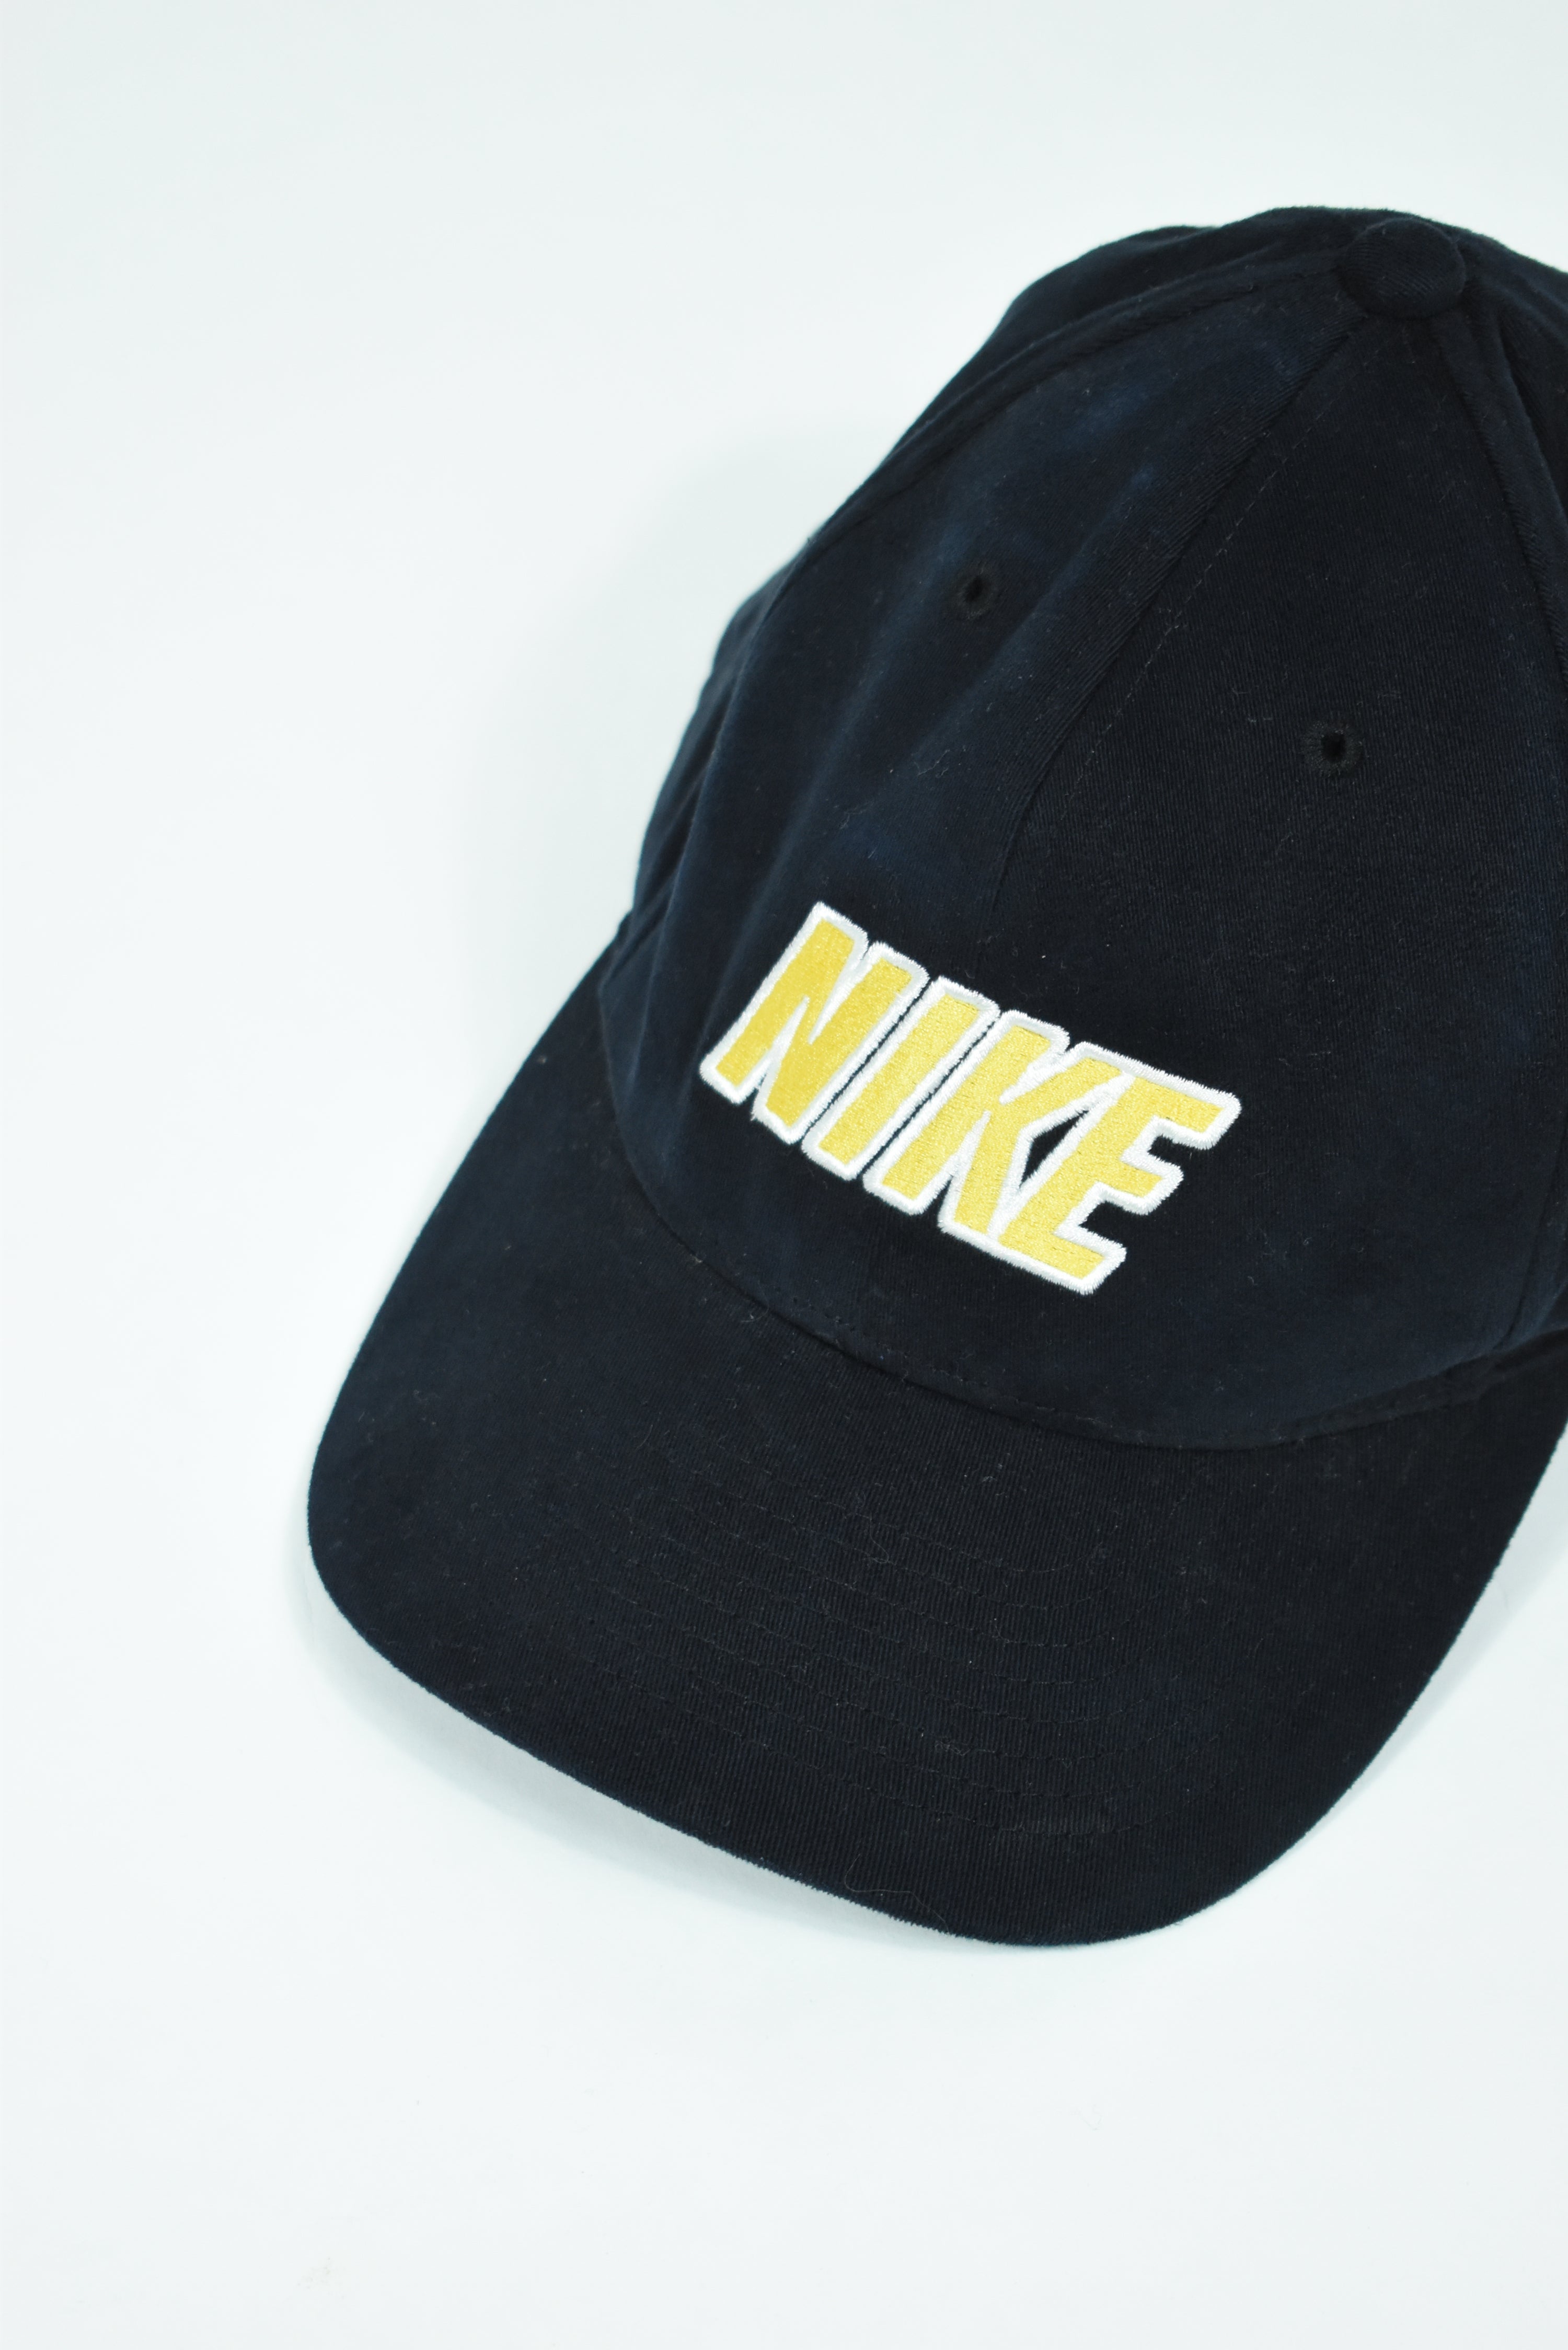 Vintage Nike Embroidery Cap OS